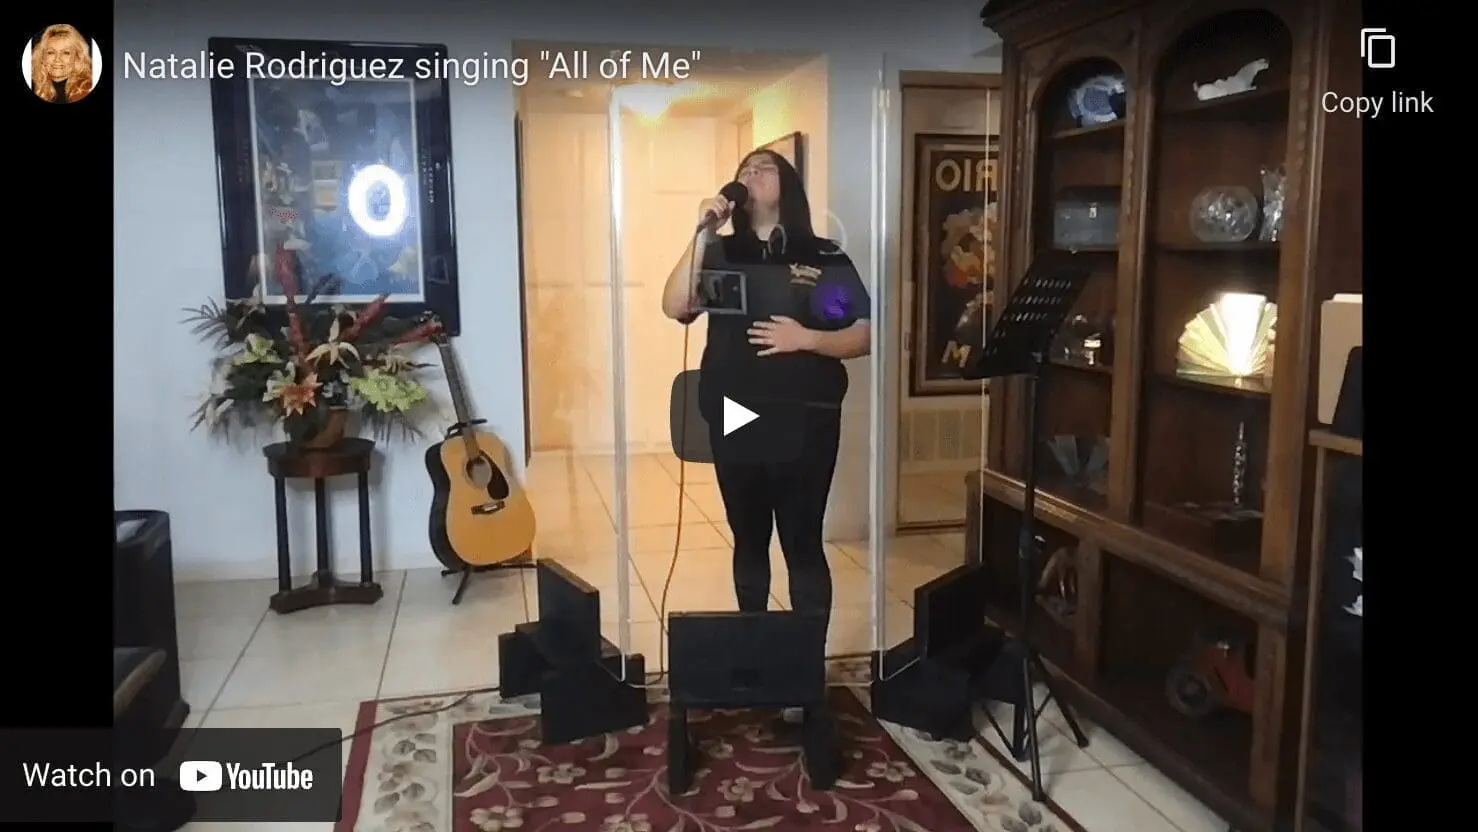 screenshot of a YouTube video of Natalie Rodriguez singing All of Me